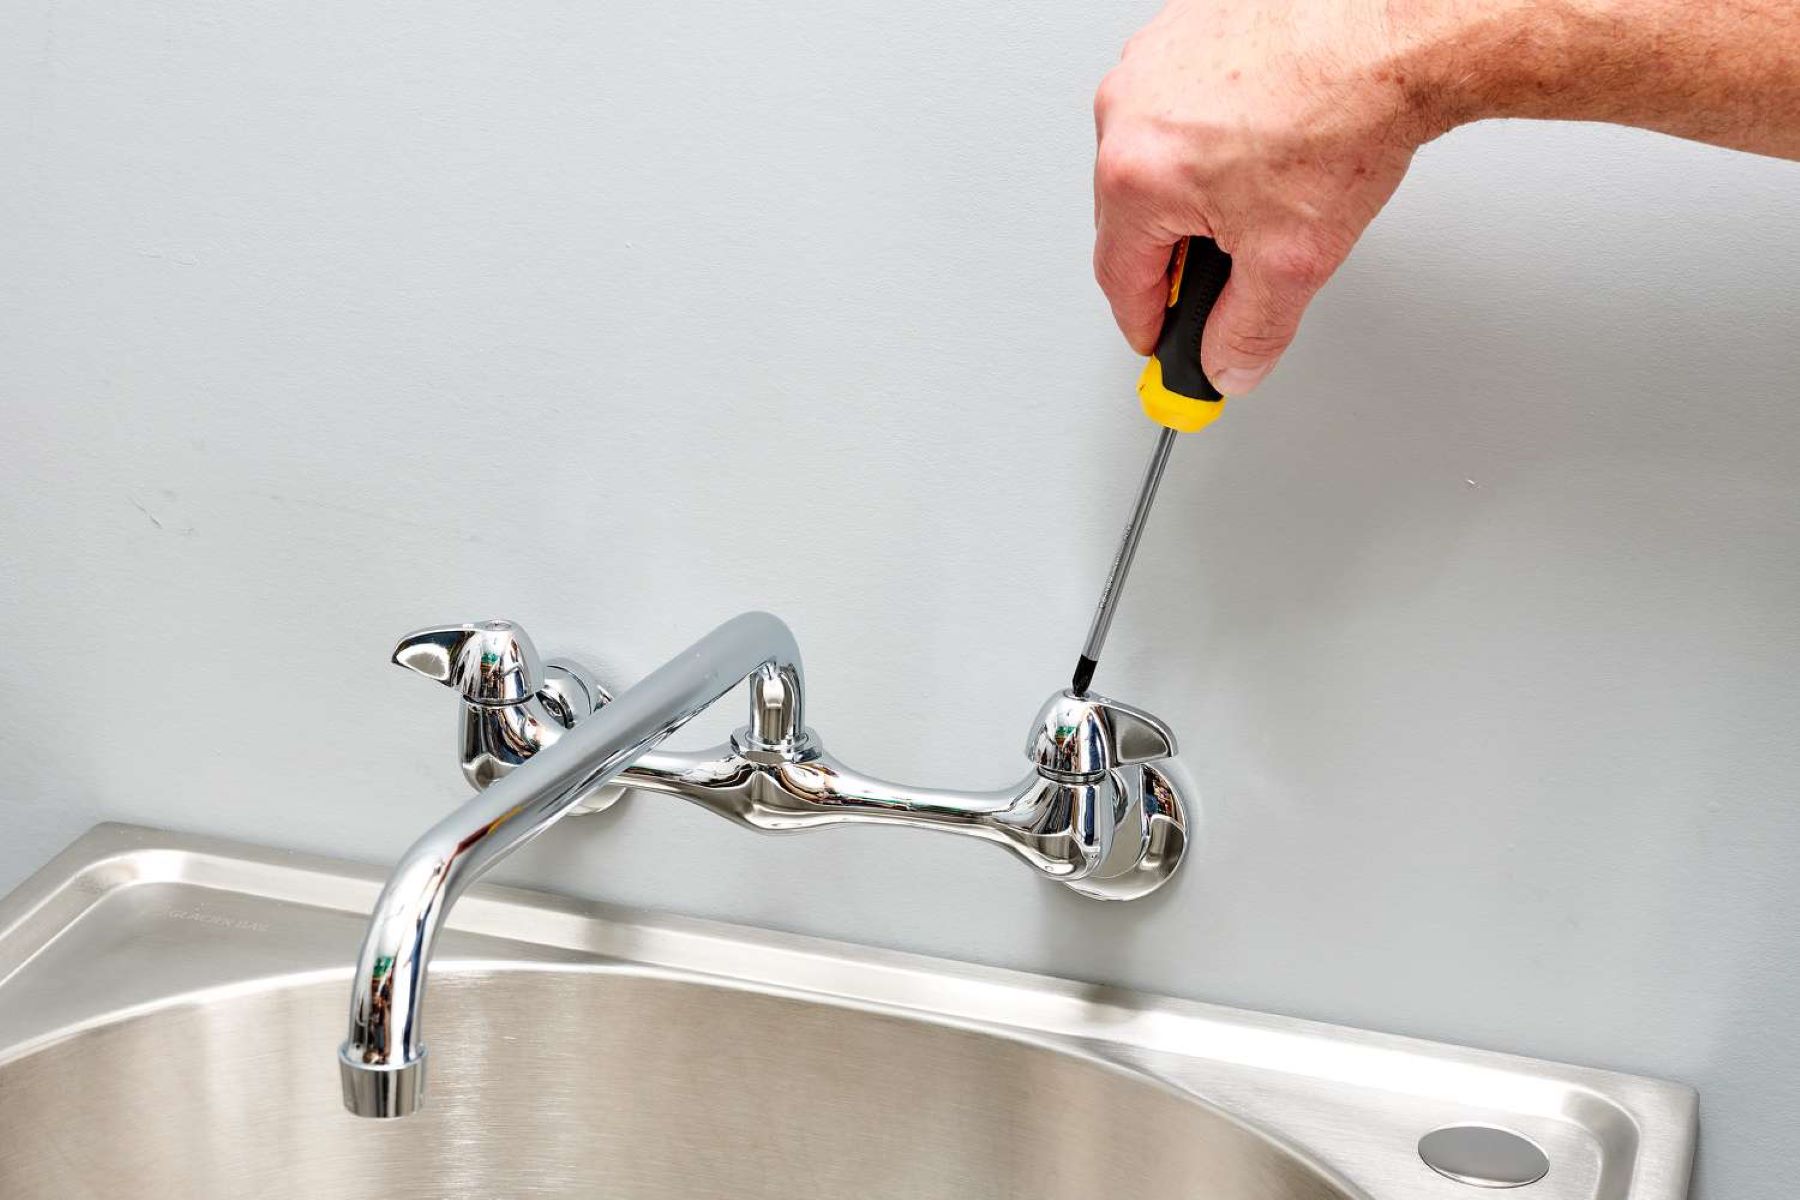 How To Repair A Design House Bathroom Faucet That Is Leaking